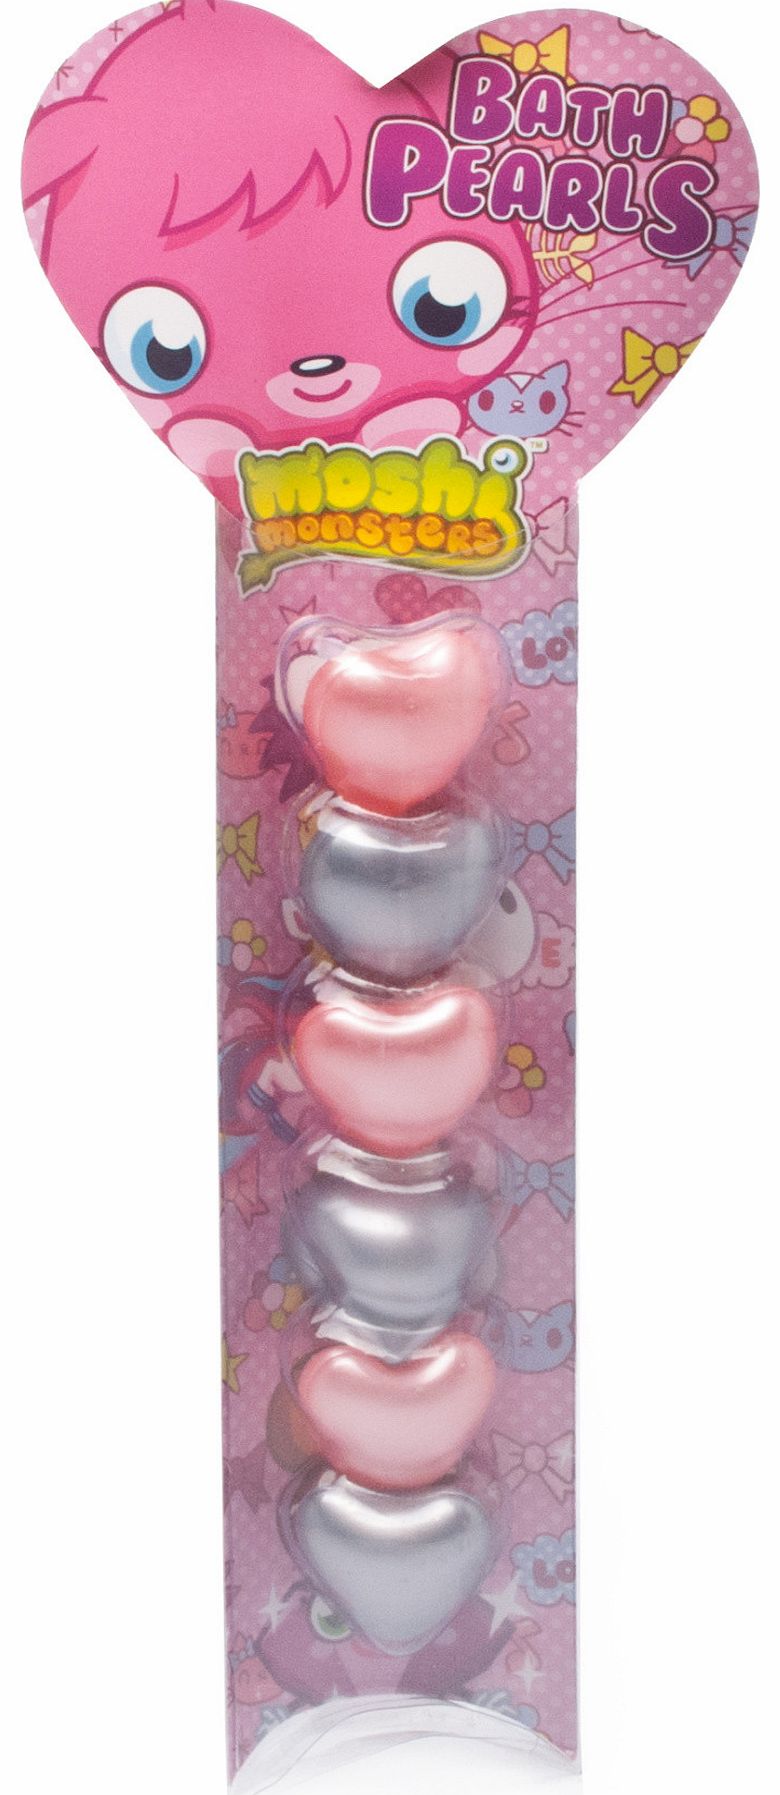 Moshi Monsters Bath Pearls with Page Marker